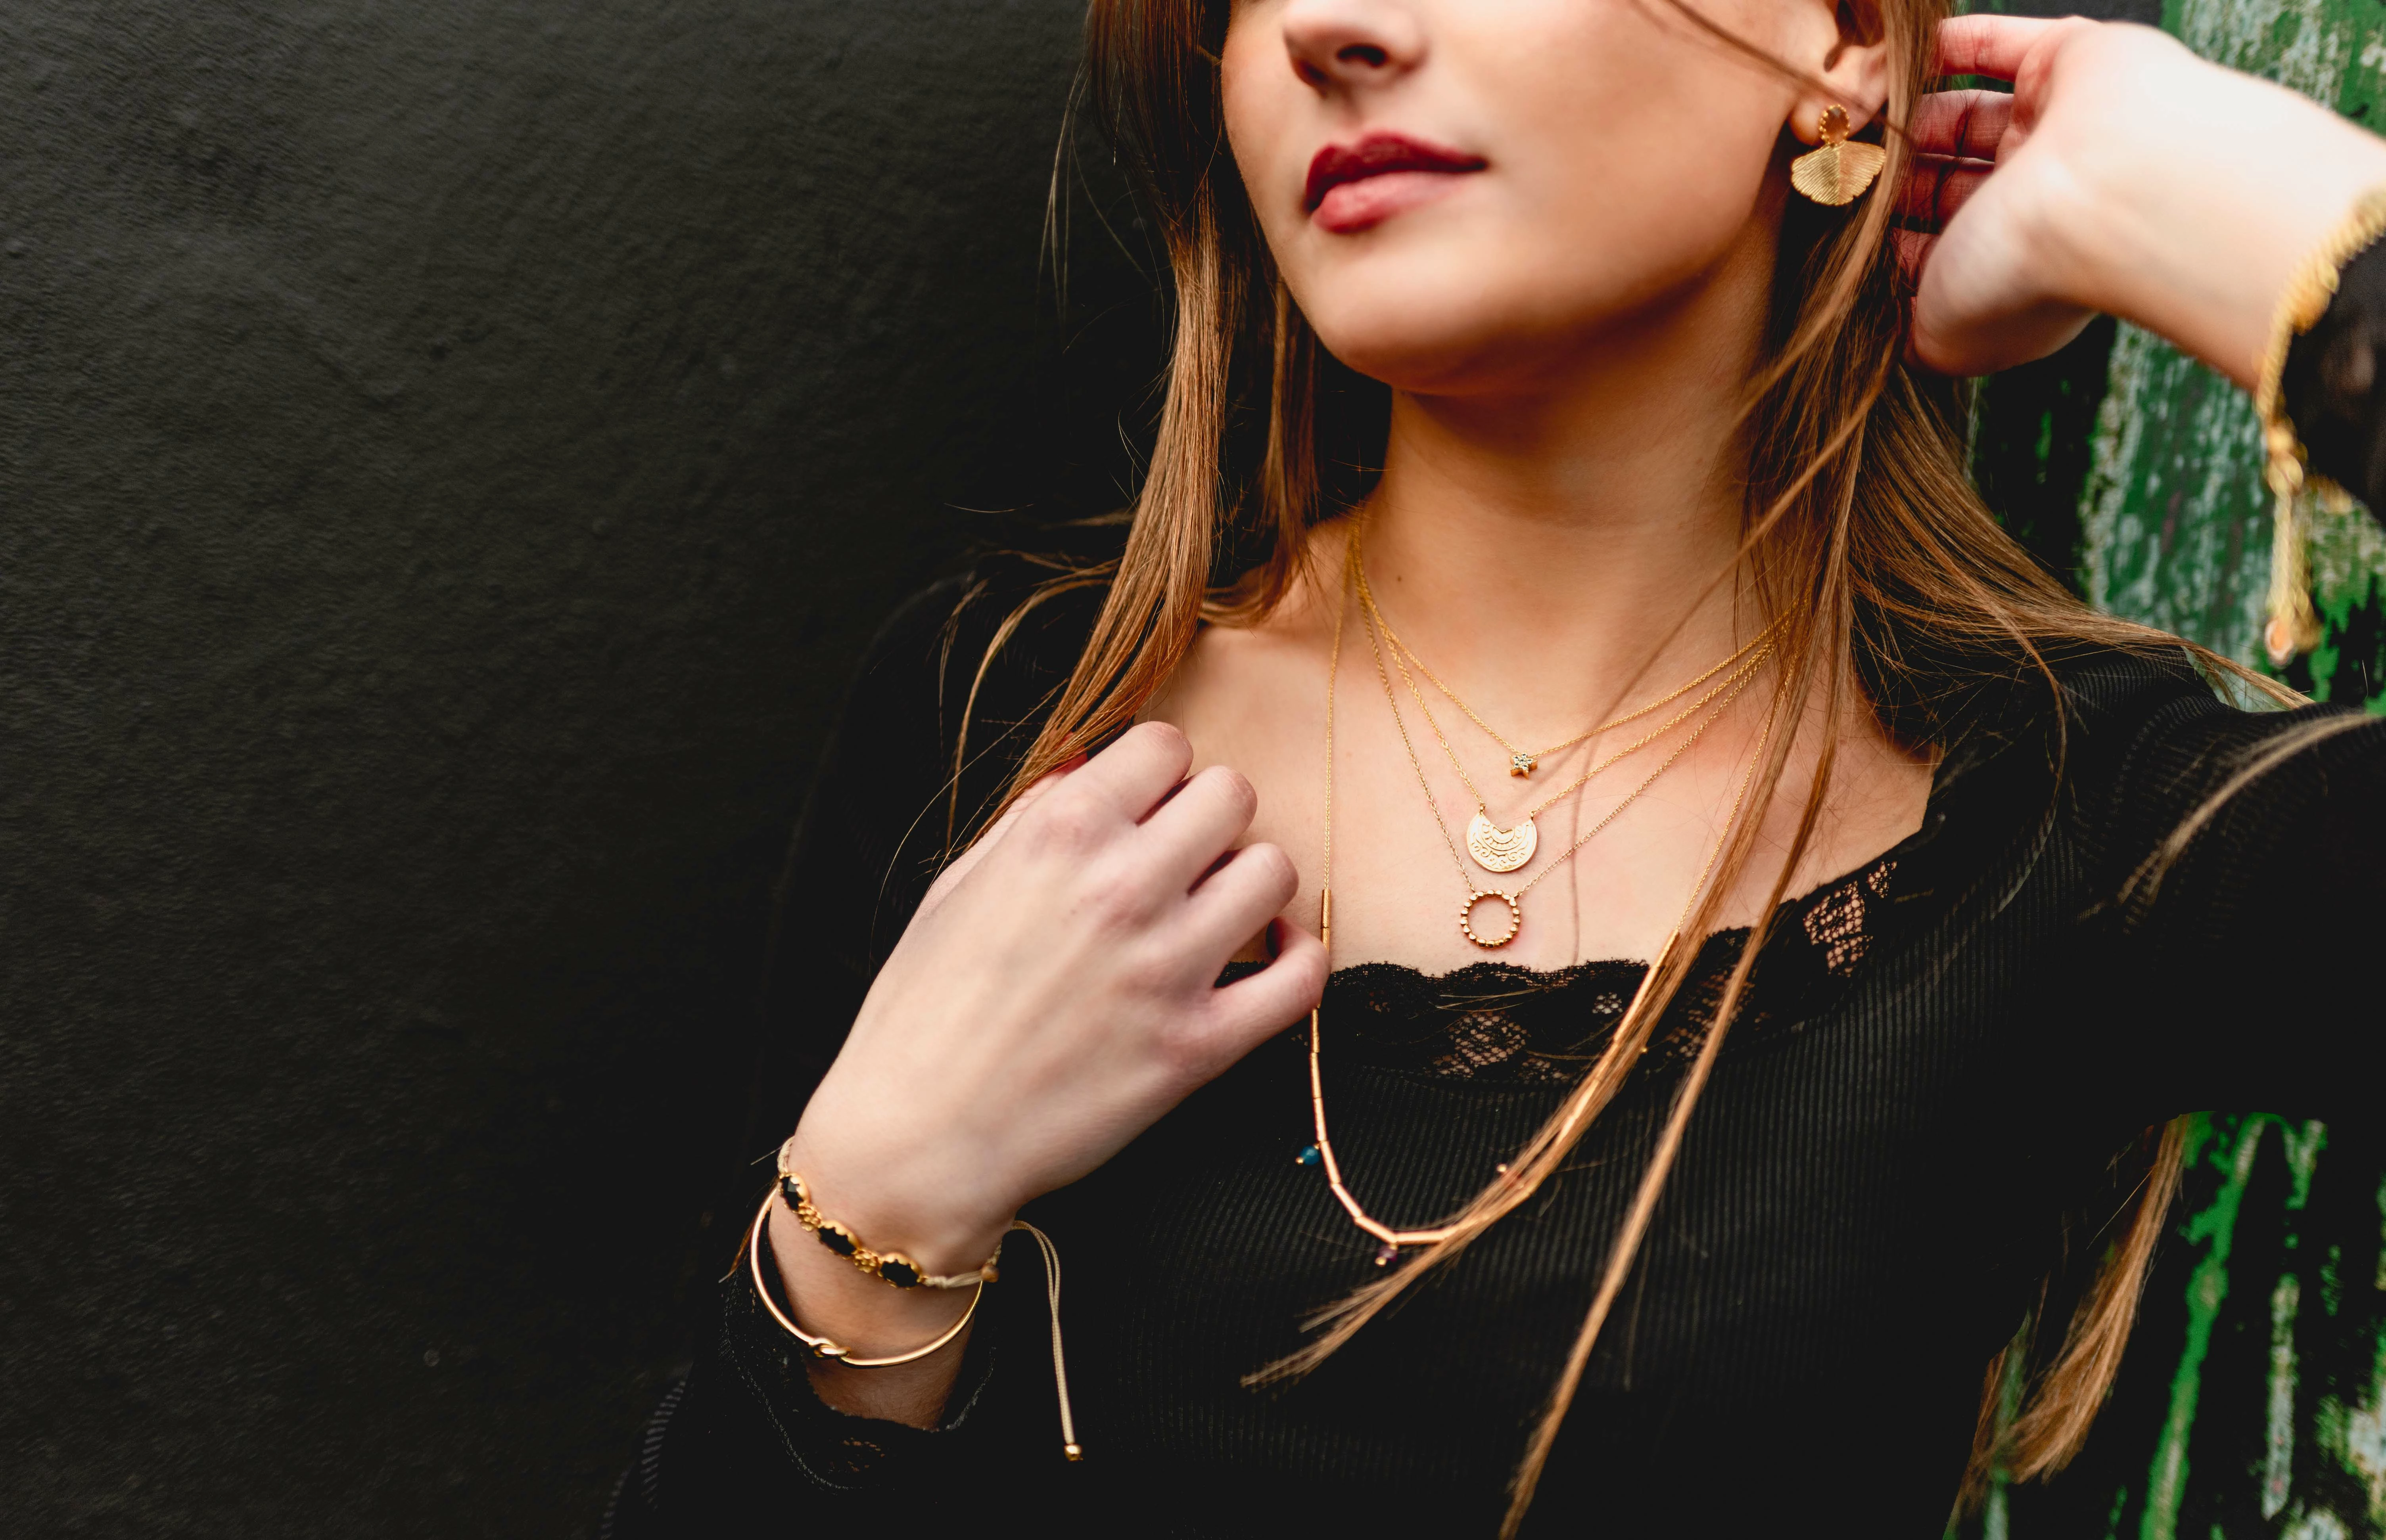 Influenstar's jewellery is all made from recycled silver and is gold-plated